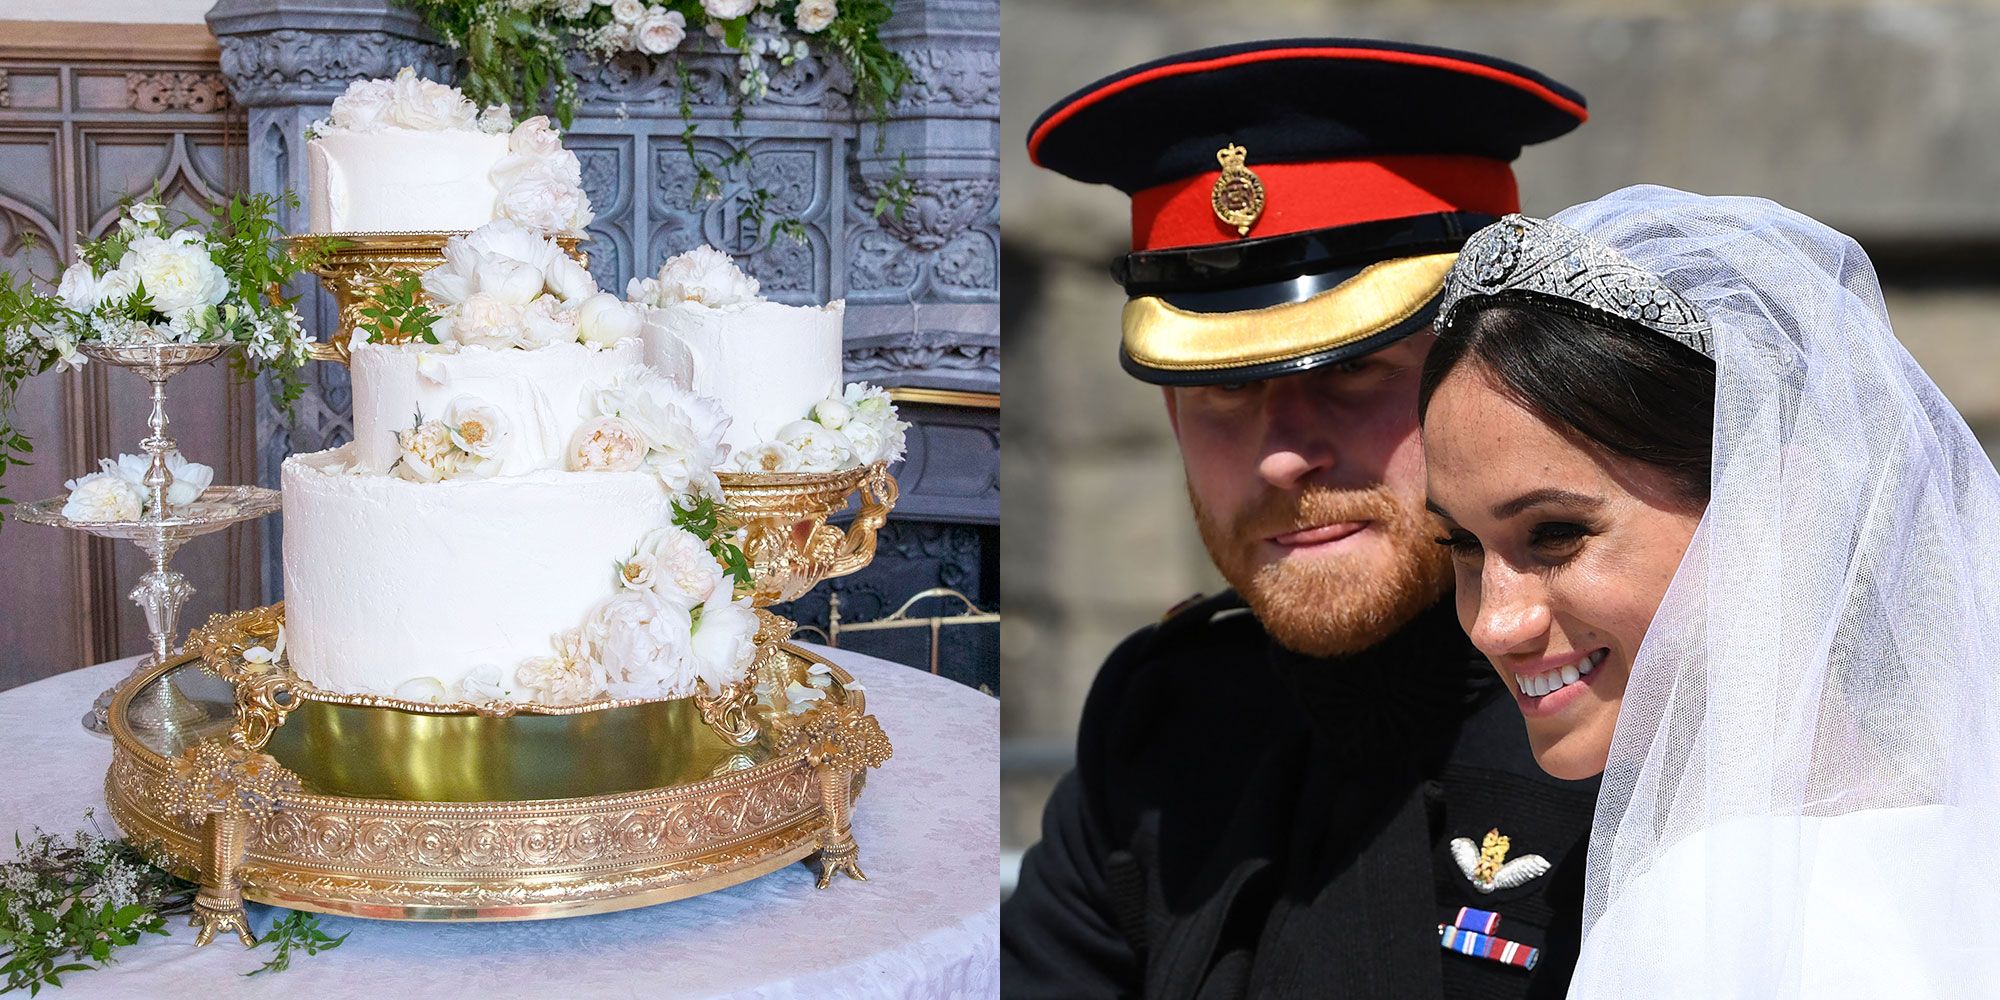 Wedding cakes and drama, drama, drama pop up on WE tv bridal shows in  August - al.com